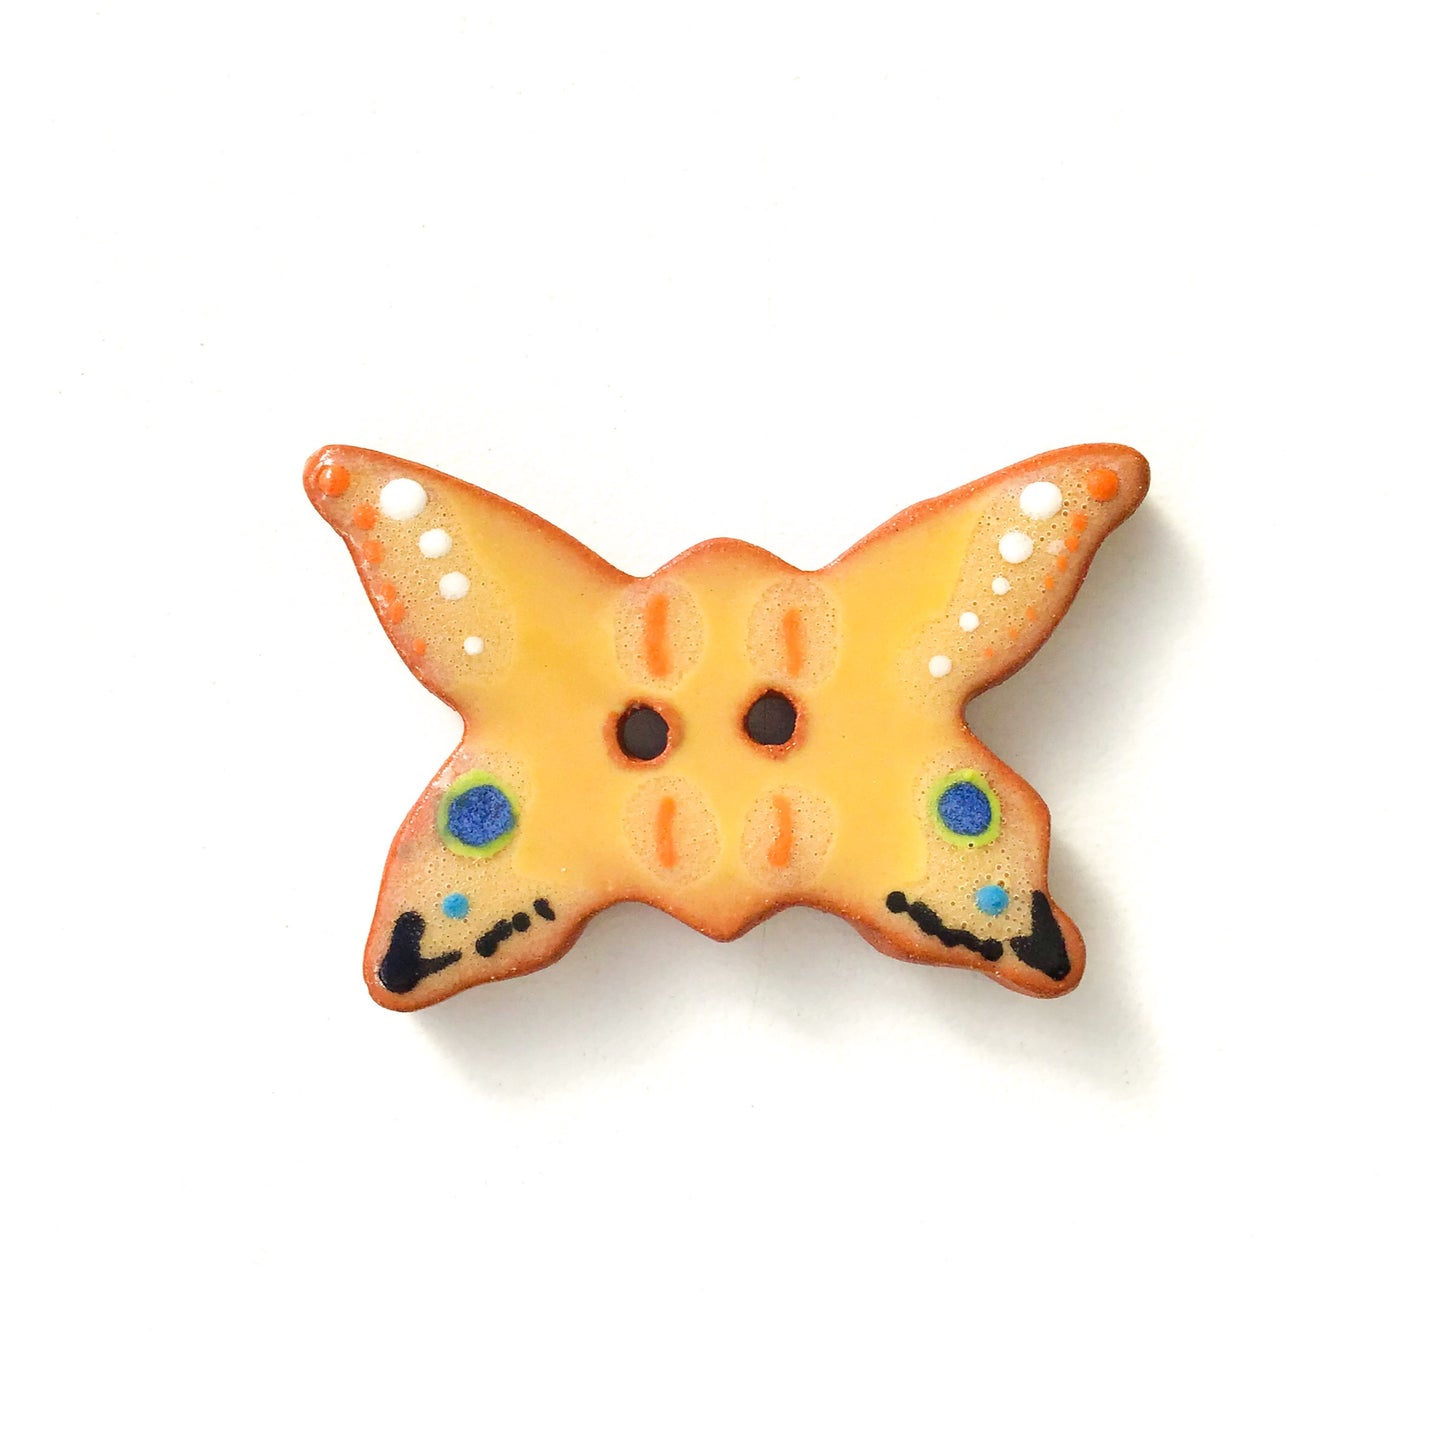 Ceramic Butterfly Buttons - Colorful Butterflies on Red Clay - 7/8" x 1  1/4"